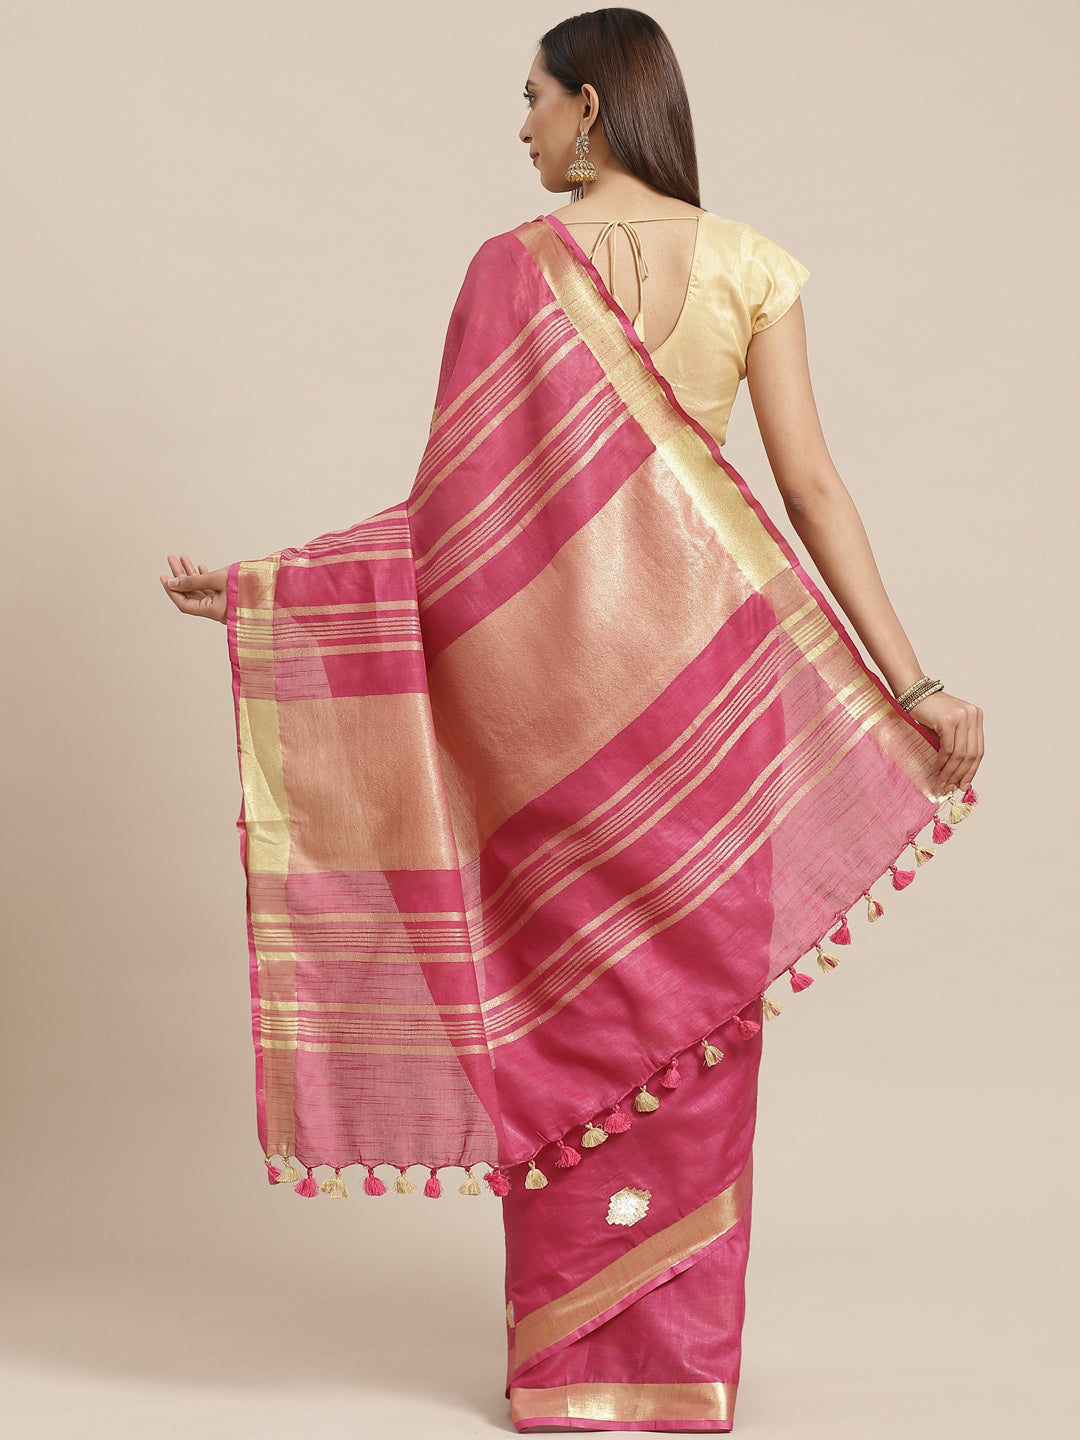 Magenta and Rose Gold, Kalakari India Linen Handwoven Saree and Blouse ALBGSA0083-Saree-Kalakari India-ALBGSA0083-Cotton, Geographical Indication, Hand Crafted, Heritage Prints, Linen, Natural Dyes, Red, Sarees, Shibori, Sustainable Fabrics, Woven, Yellow-[Linen,Ethnic,wear,Fashionista,Handloom,Handicraft,Indigo,blockprint,block,print,Cotton,Chanderi,Blue, latest,classy,party,bollywood,trendy,summer,style,traditional,formal,elegant,unique,style,hand,block,print, dabu,booti,gift,present,glamorous